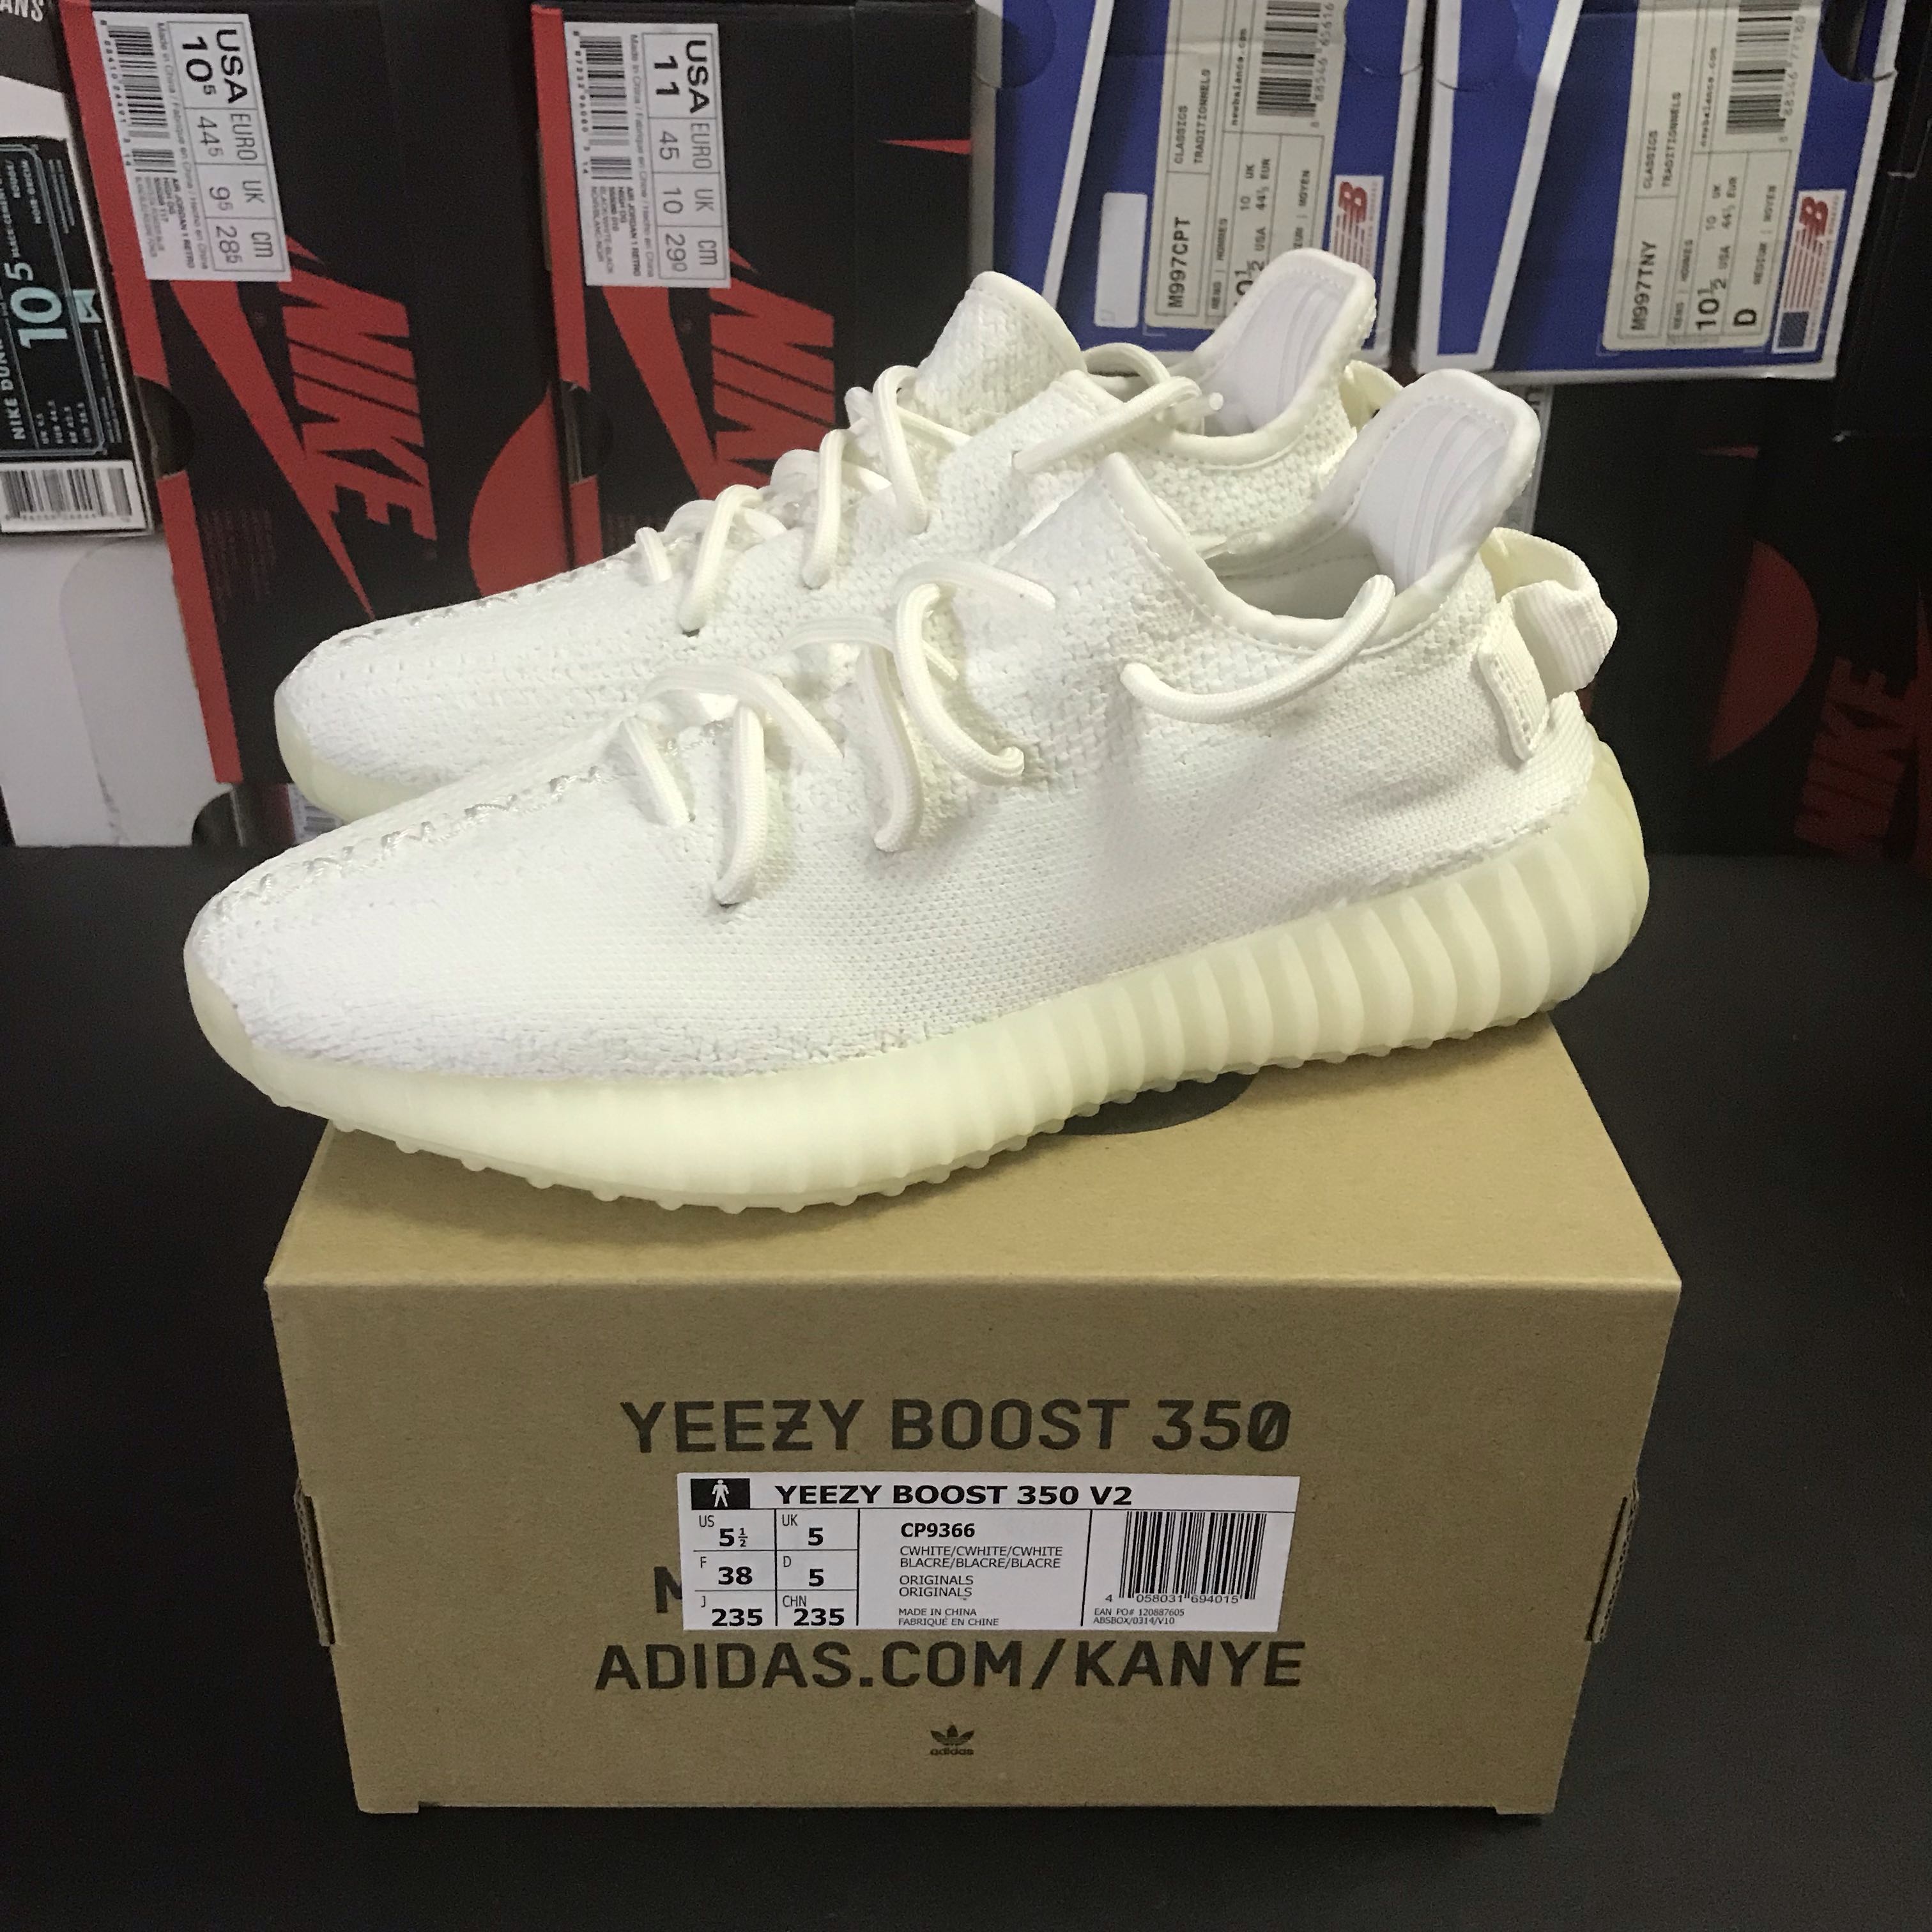 Yeezy Boost 350 V2 Cream White US 5.5 (UK 5), Men's Fashion, Footwear,  Sneakers on Carousell